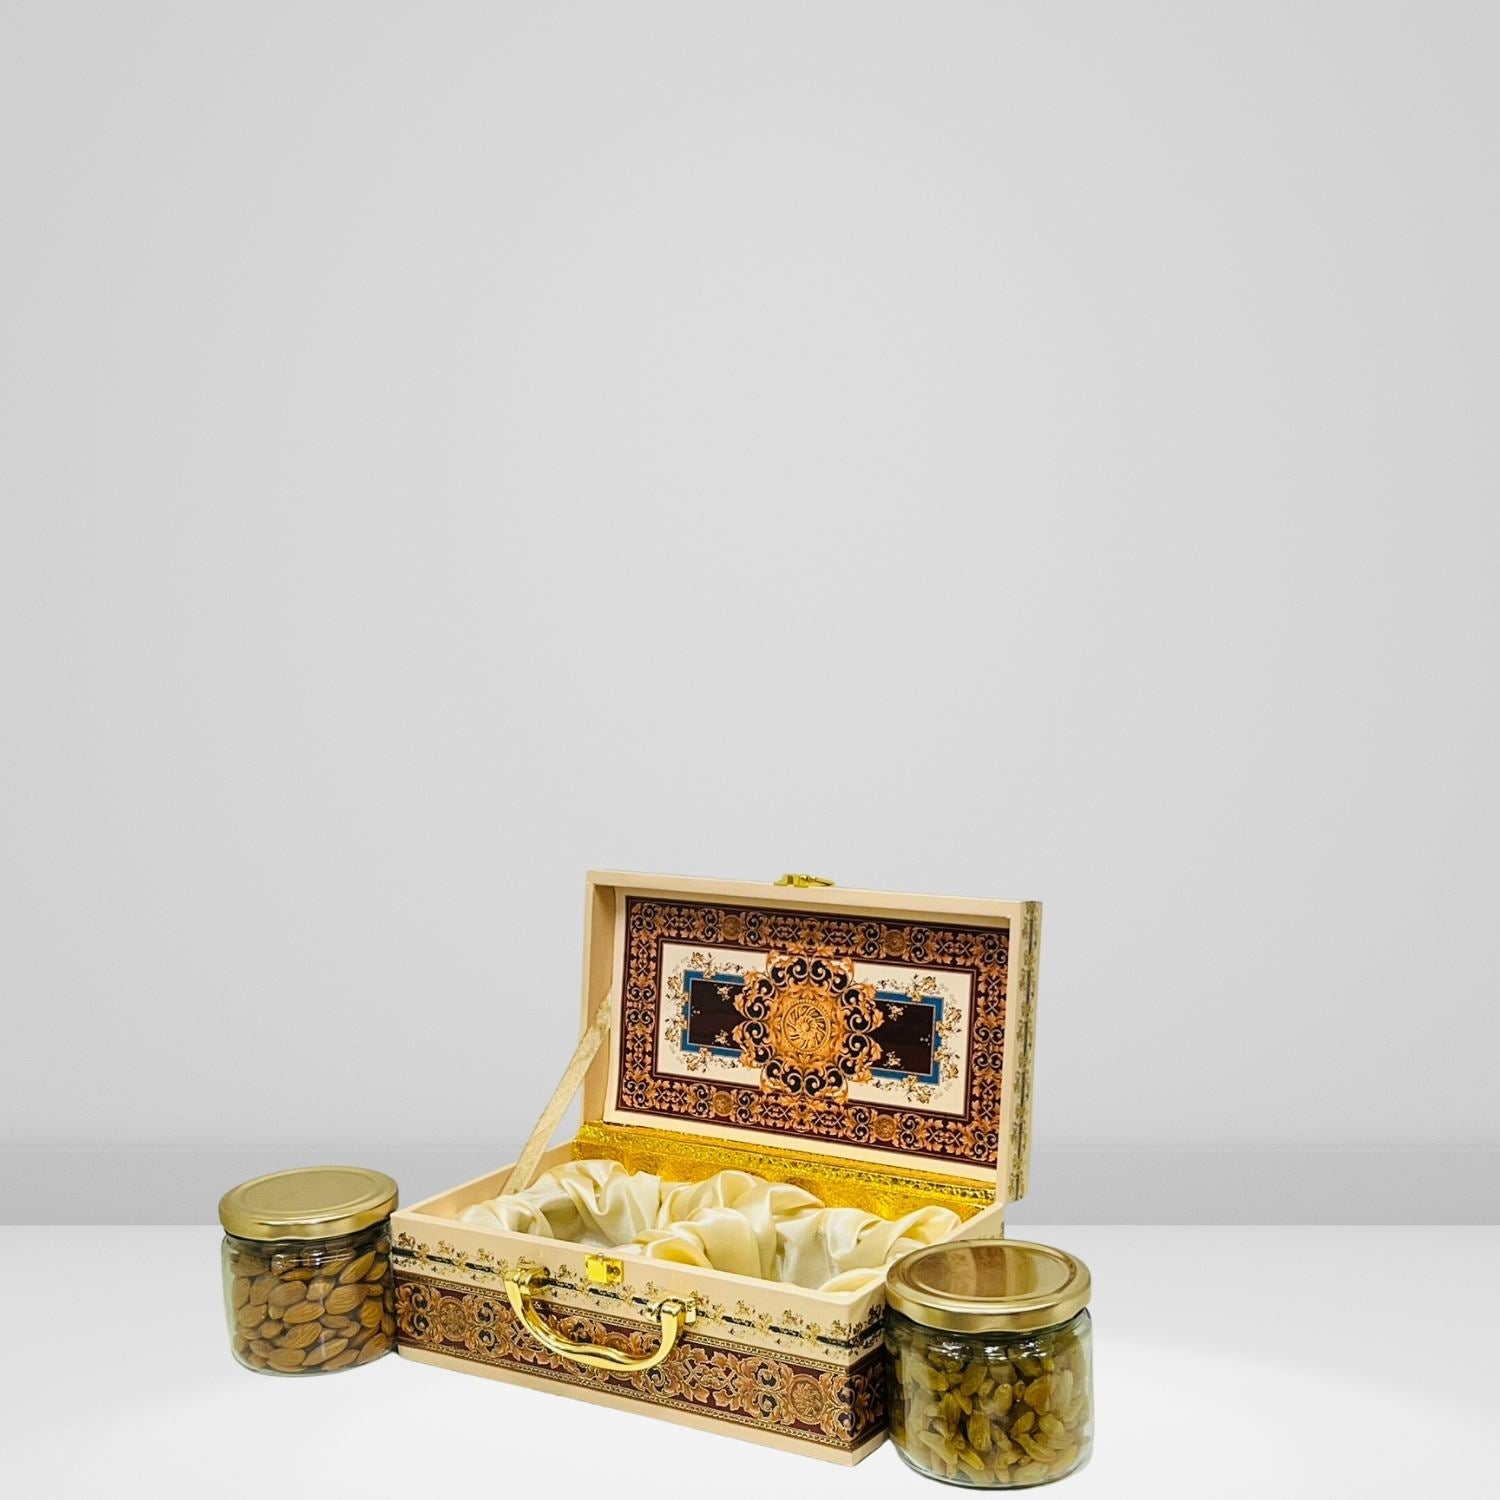 Gift Box With 2 Premium Dry Fruits in Glass Jars